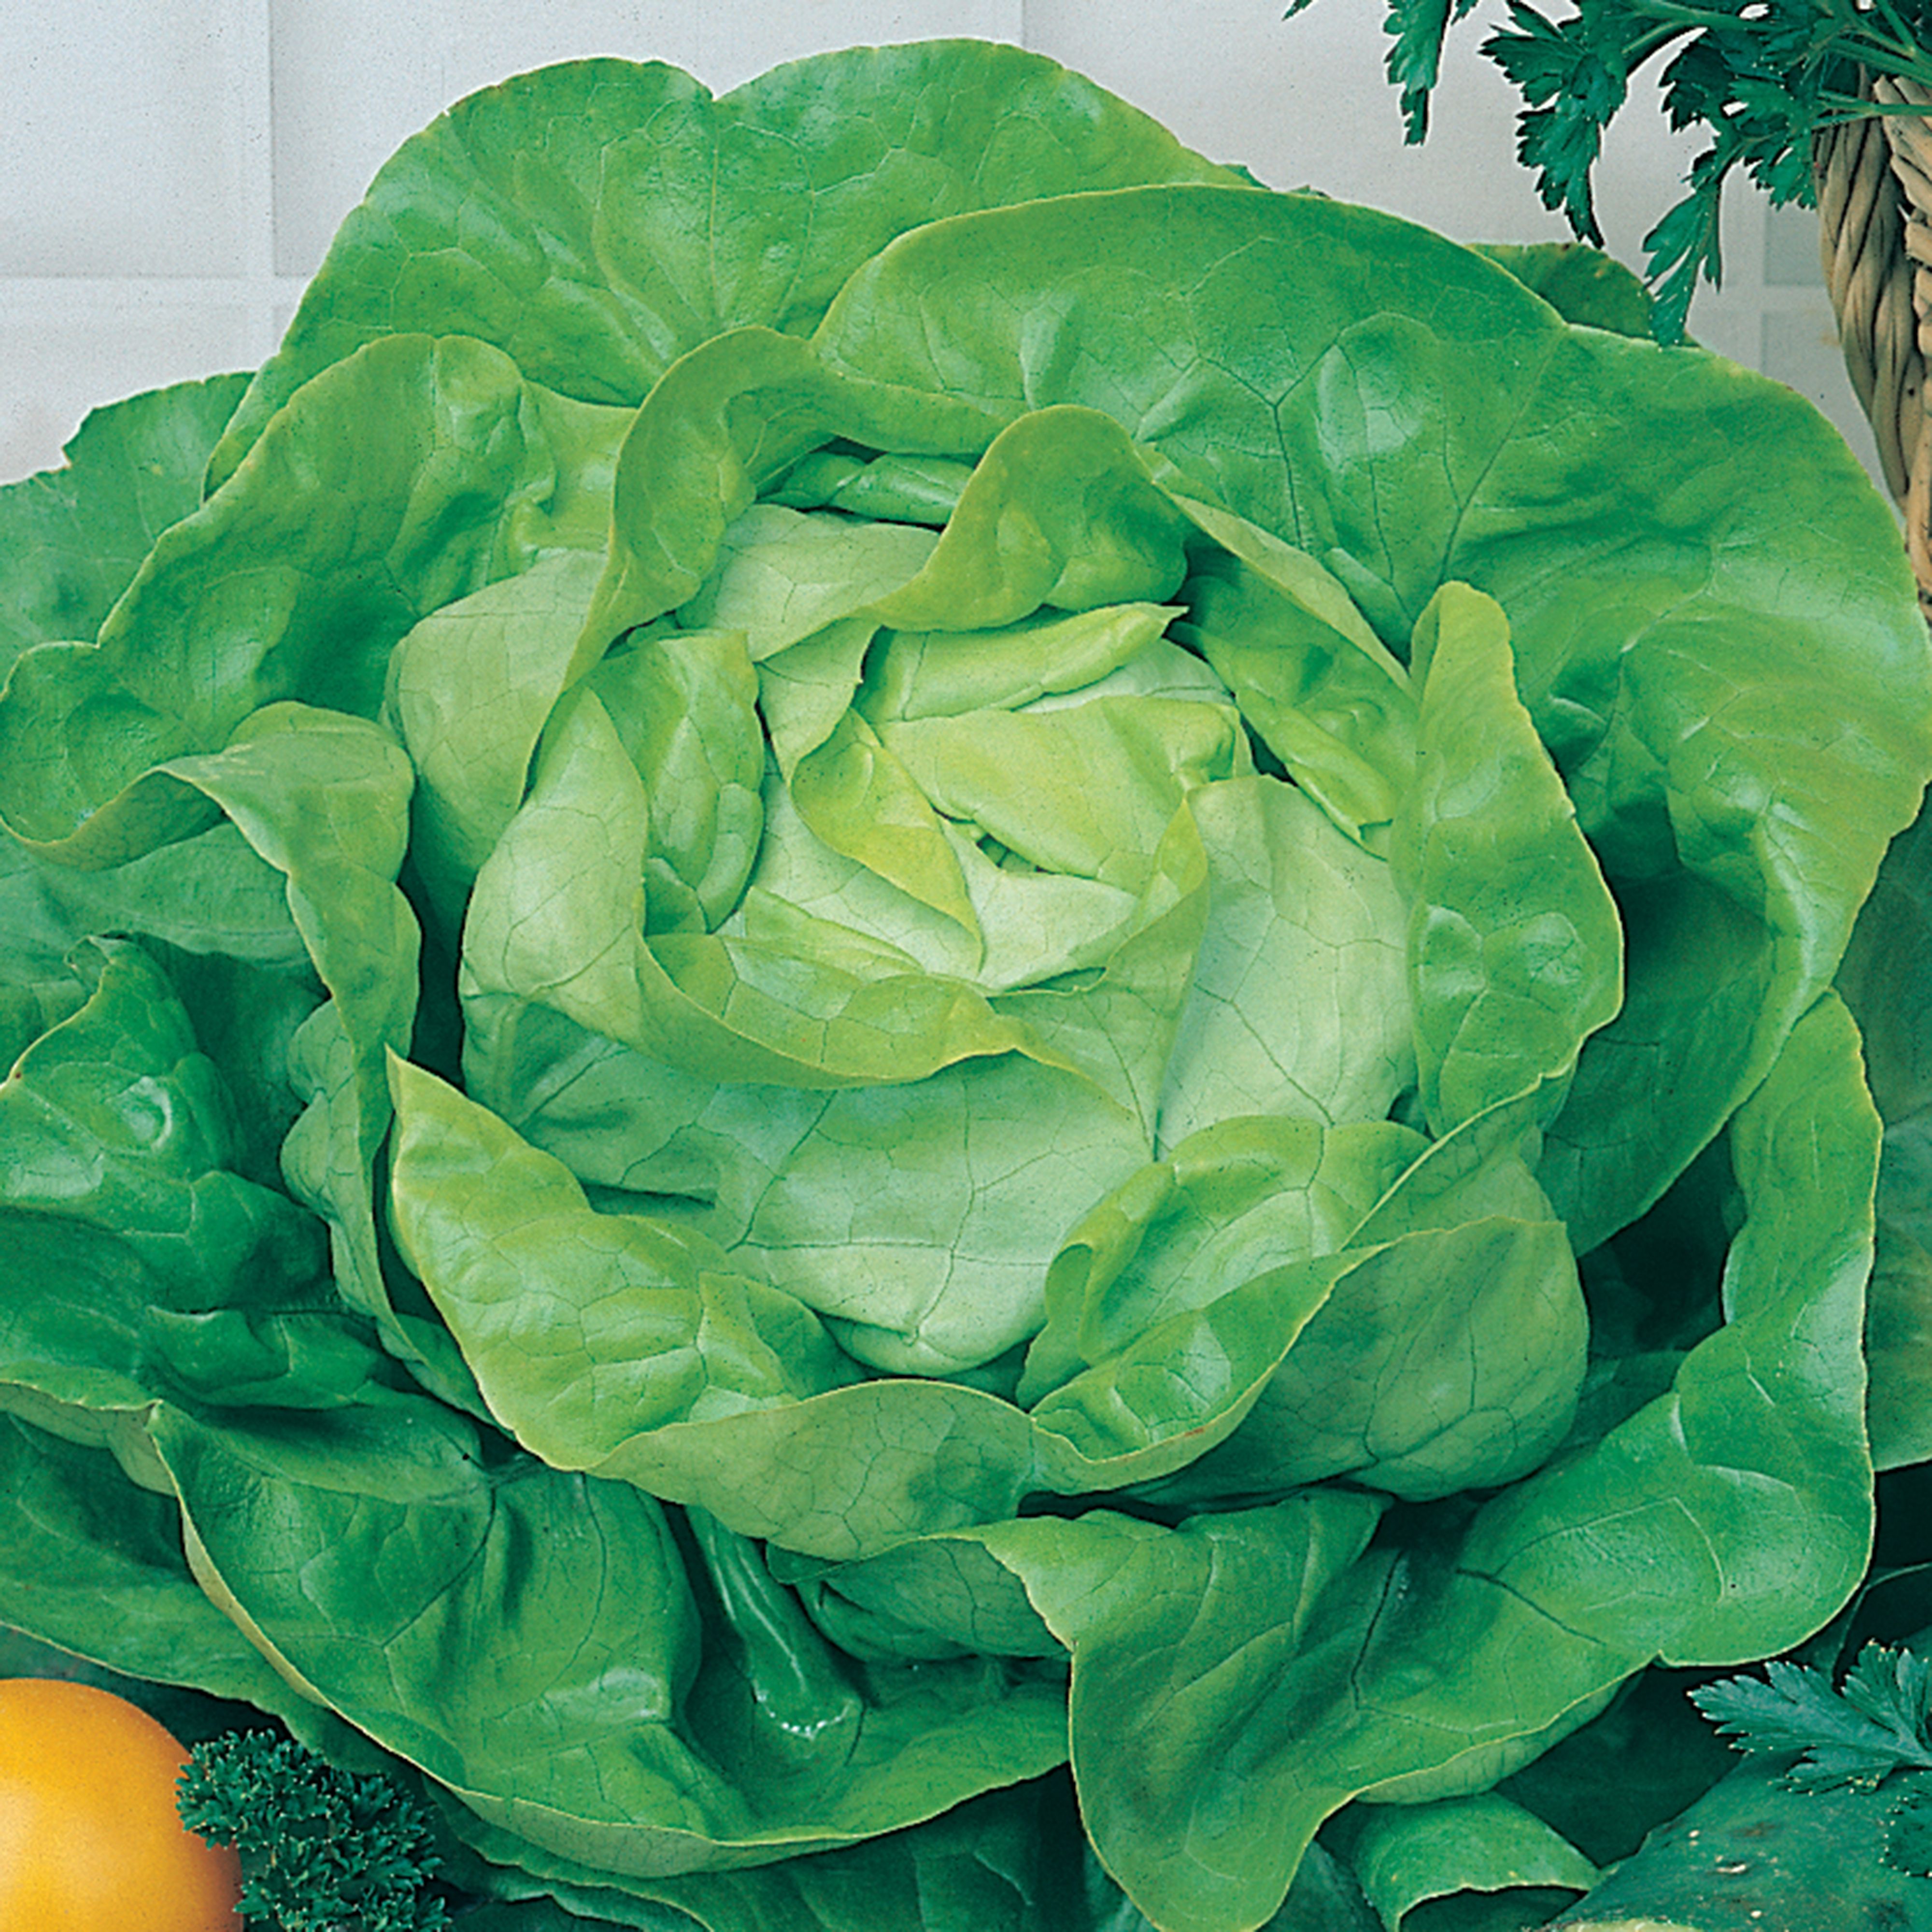 Johnsons All the Year Round Lettuce Seeds